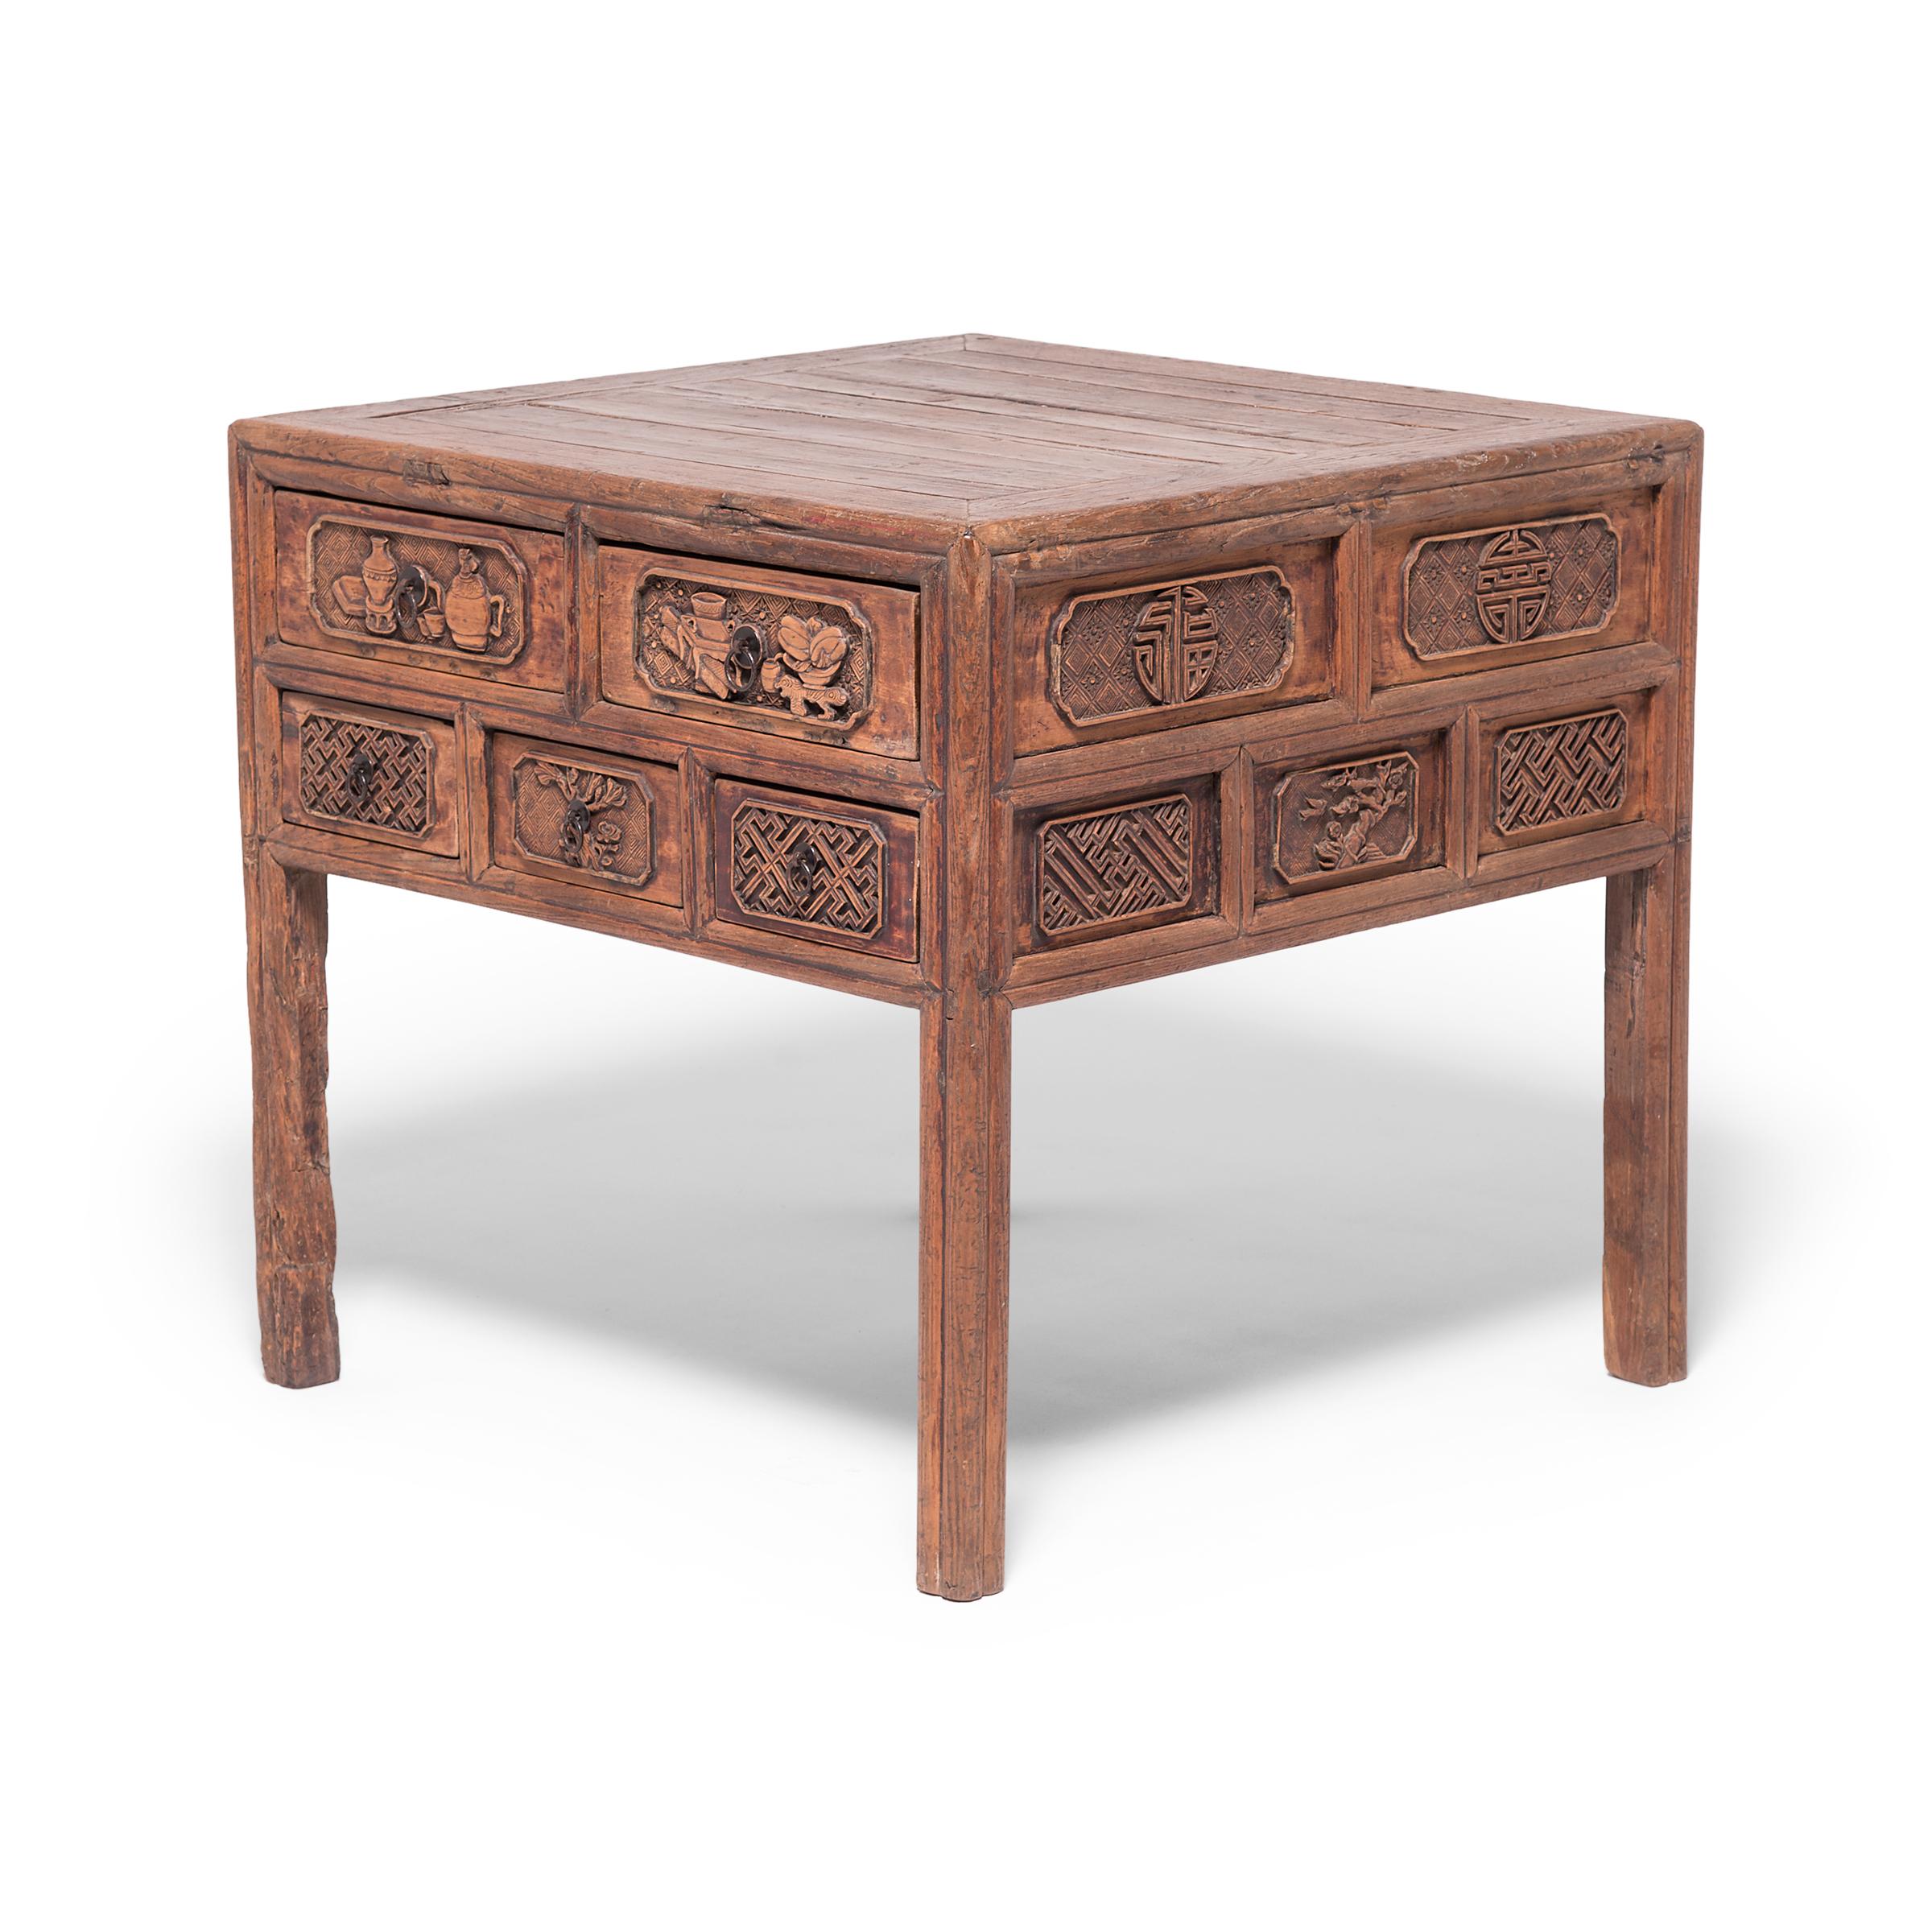 Appealing to the rarified taste of China’s literati, this Qing-dynasty table depicts the auspicious objects found in a scholar’s studio, including censors, scrolls, and fine porcelain. The table’s straightforward design puts all eyes on its ten